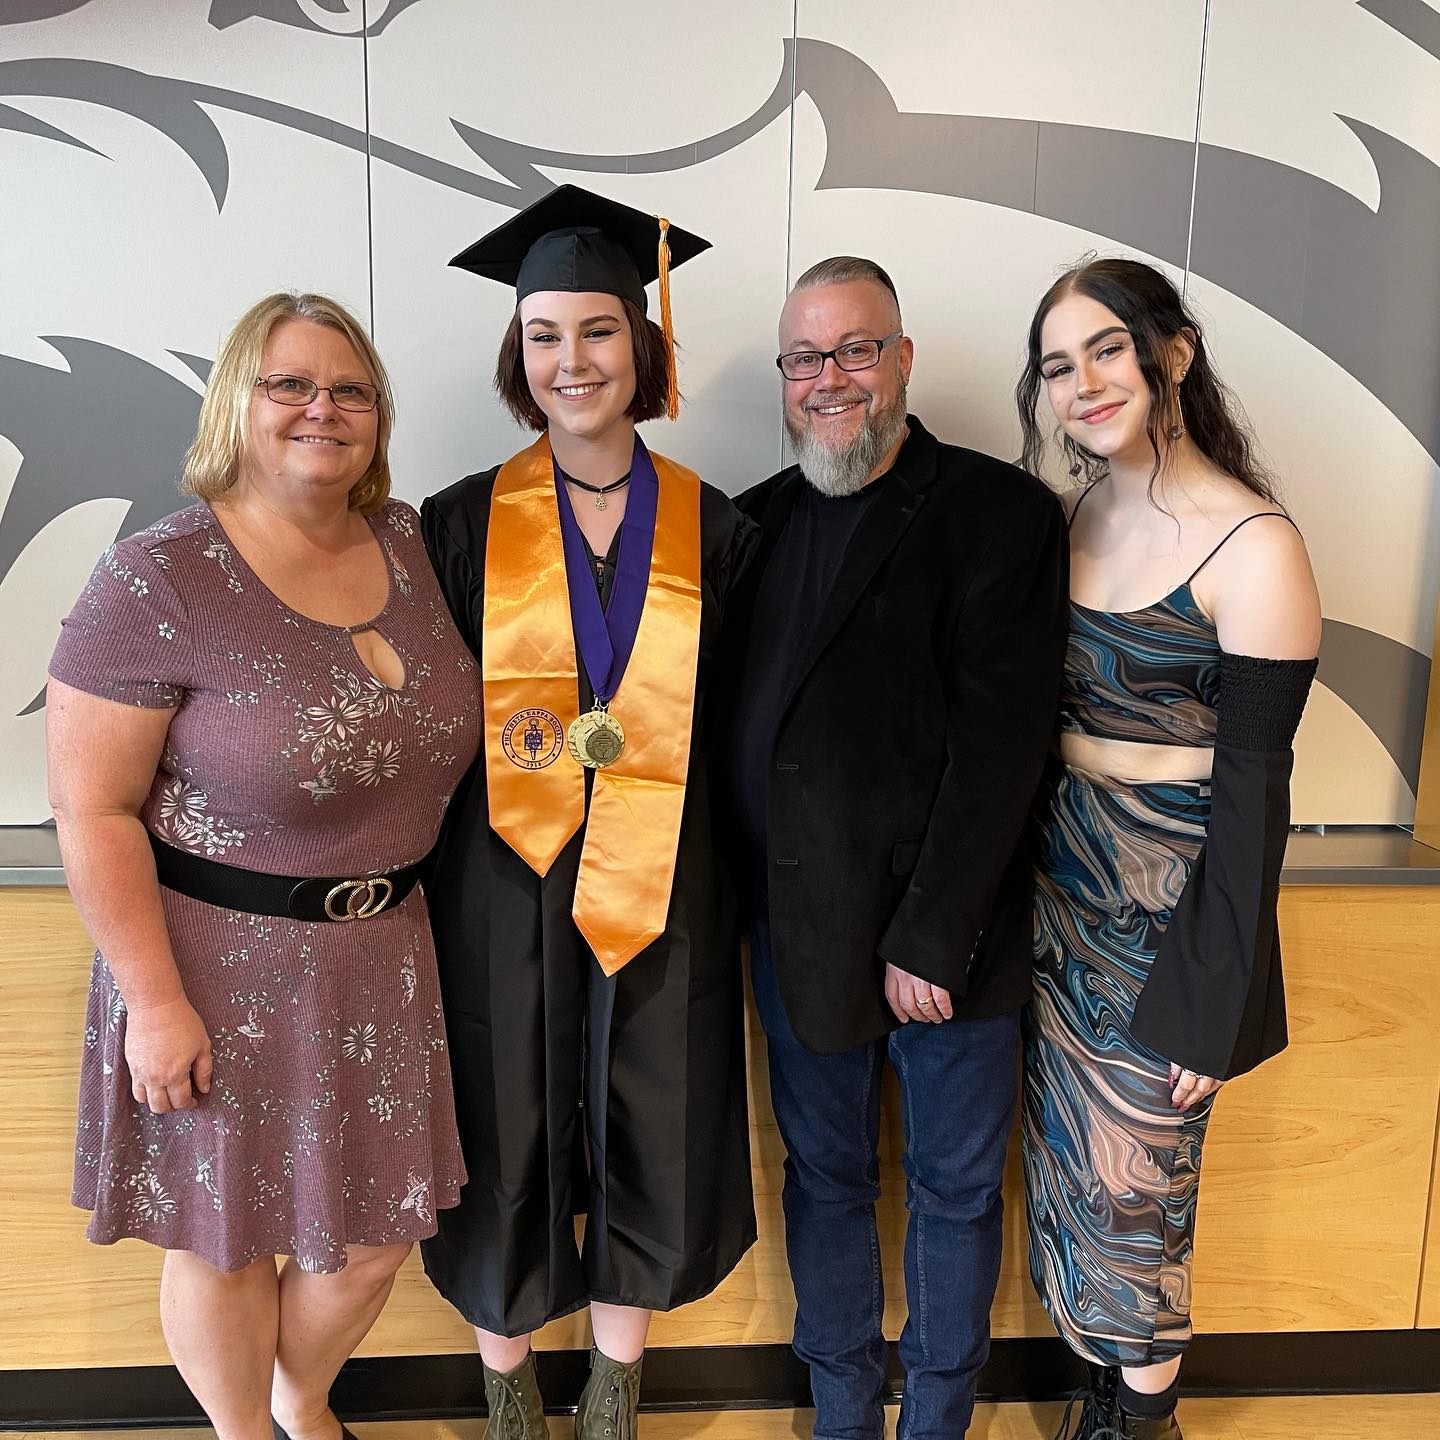 A huge congrats to my daughter Clarissa for graduating from JJC with high honors and obtaining her Associates. Onward to UIC. So proud of you Bear.